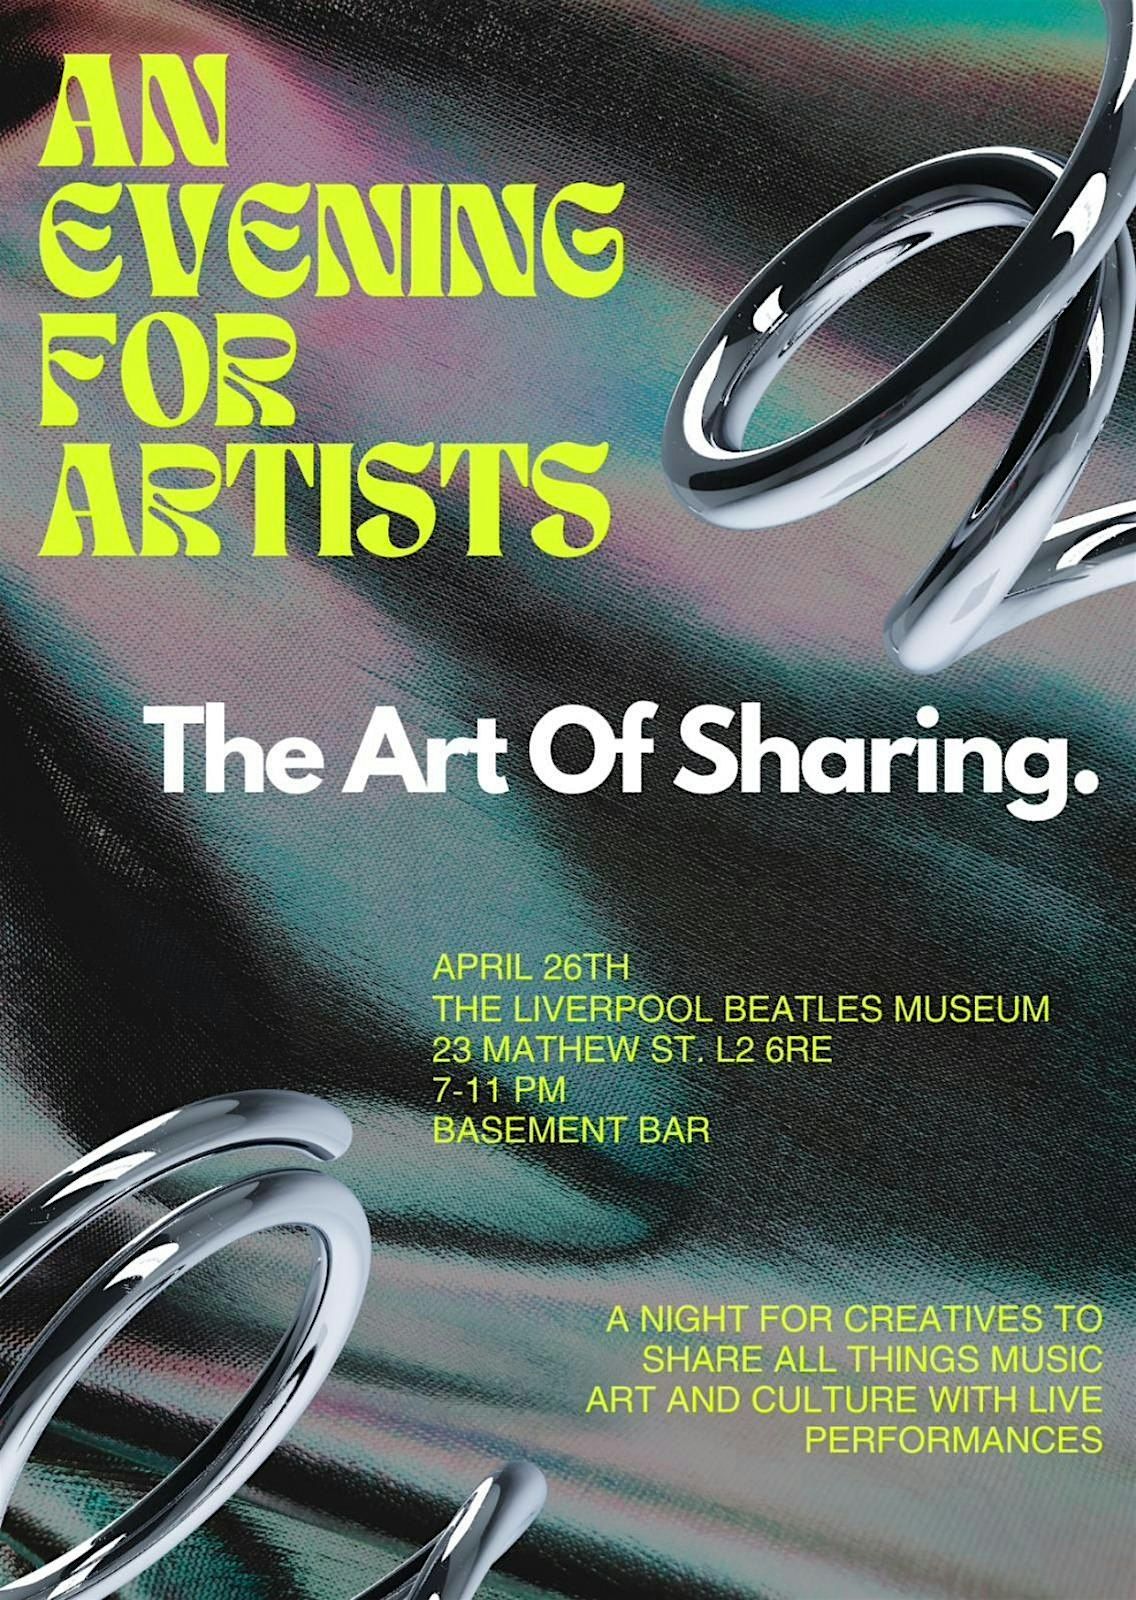 An Evening For Artists: The Art Of Sharing